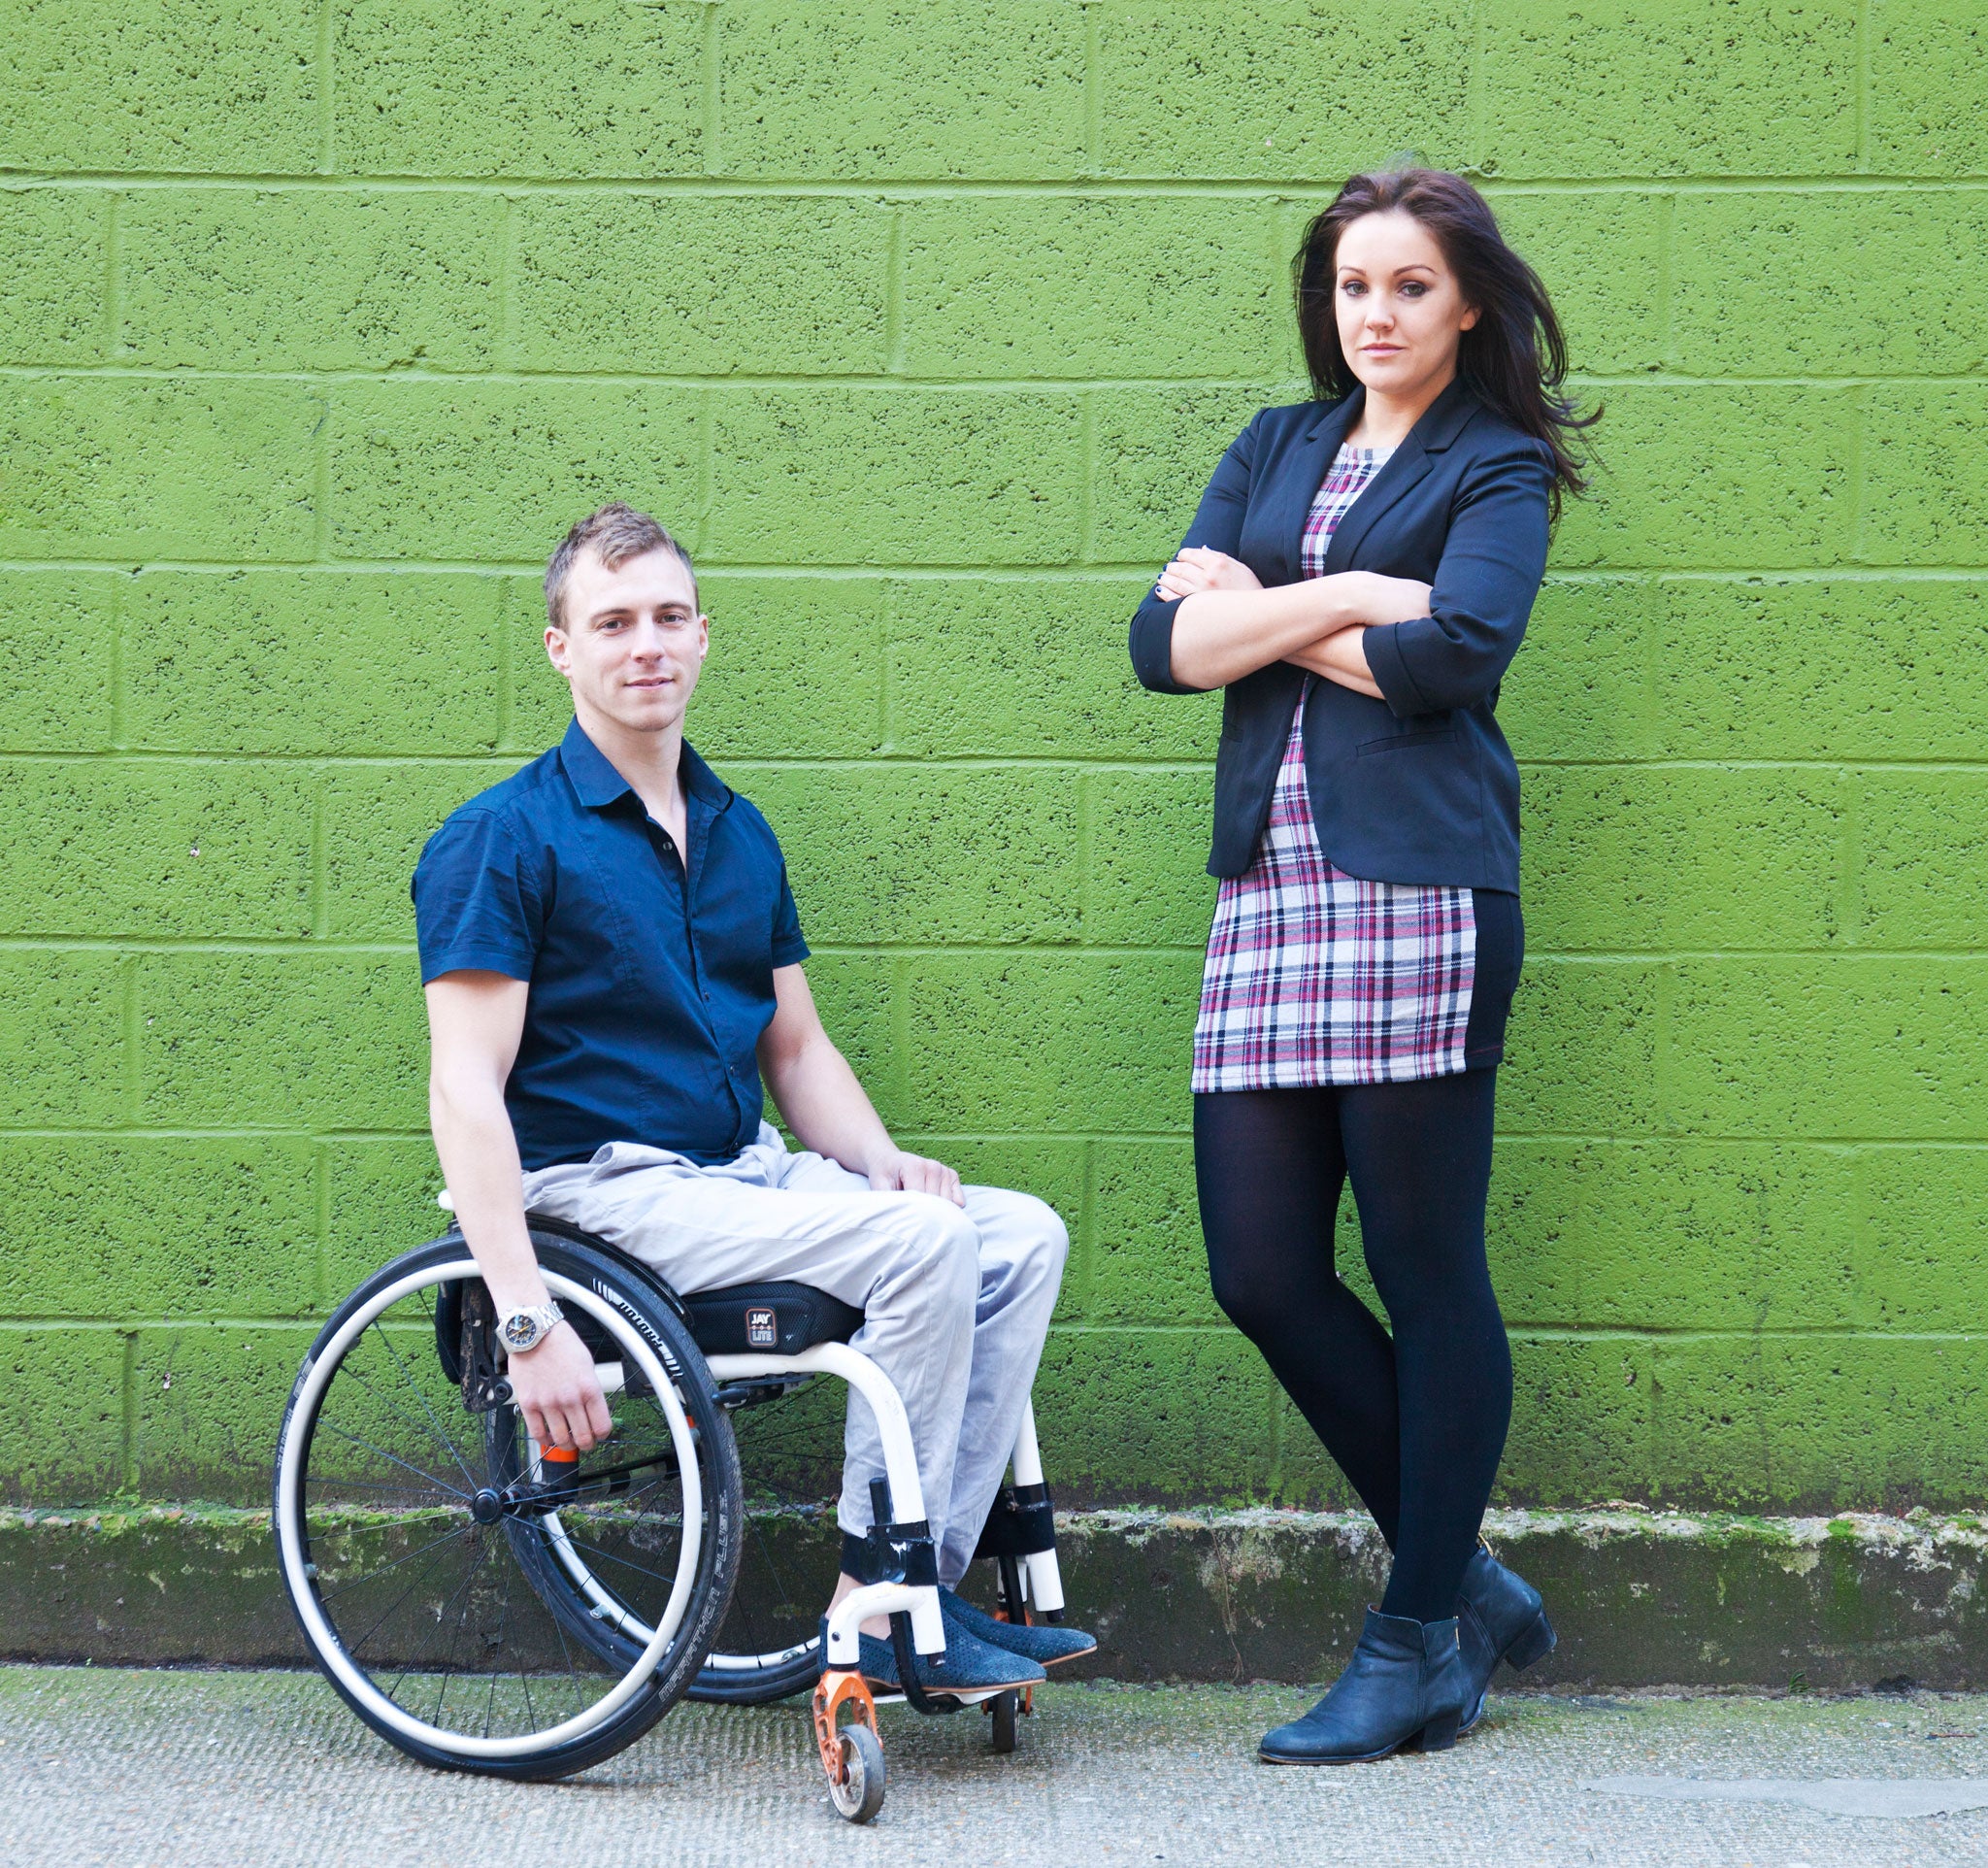 Arthur and Rachael met at Channel 4's auditions for the new faces for the Paralympics